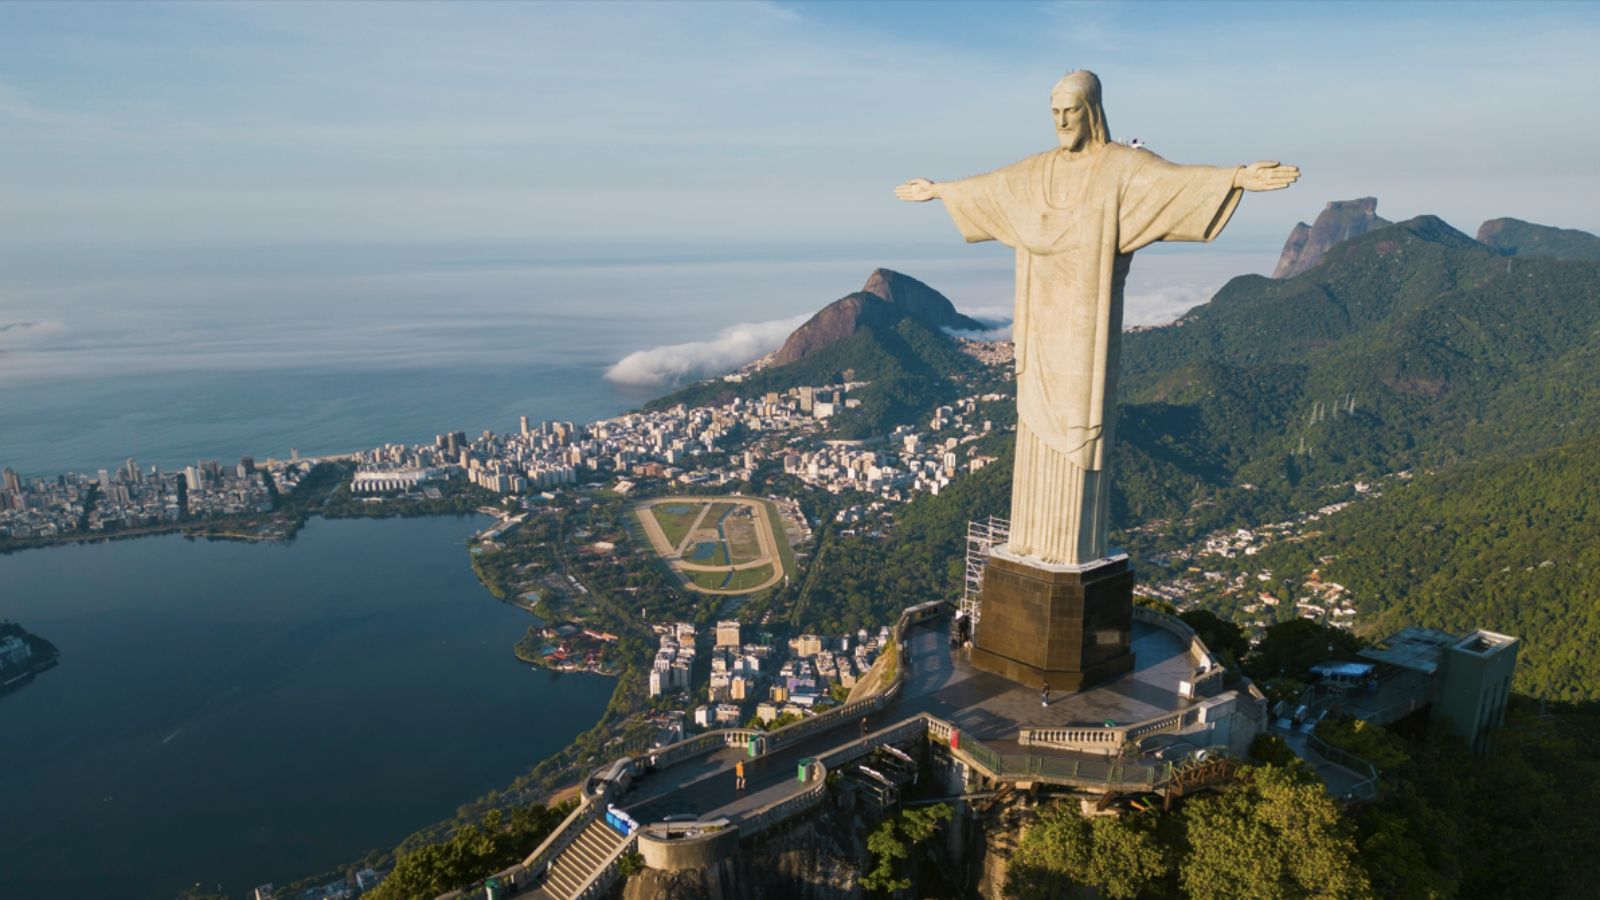 <p>Built in 1931, this statue of Christ overlooking Rio de Janeiro from the summit of Mount Corcovado is a cultural icon of Brazil. The Art Deco statue stands 98 feet tall, with its arms stretched wide in a gesture of peace, and is made from concrete and soapstone. <a href="https://study.com/academy/lesson/why-is-christ-the-redeemer-considered-one-of-the-seven-wonders-of-the-world.html">Study.com</a> says the statue is one of the new ‘7 wonders of the world’ due to its impressive size.</p>